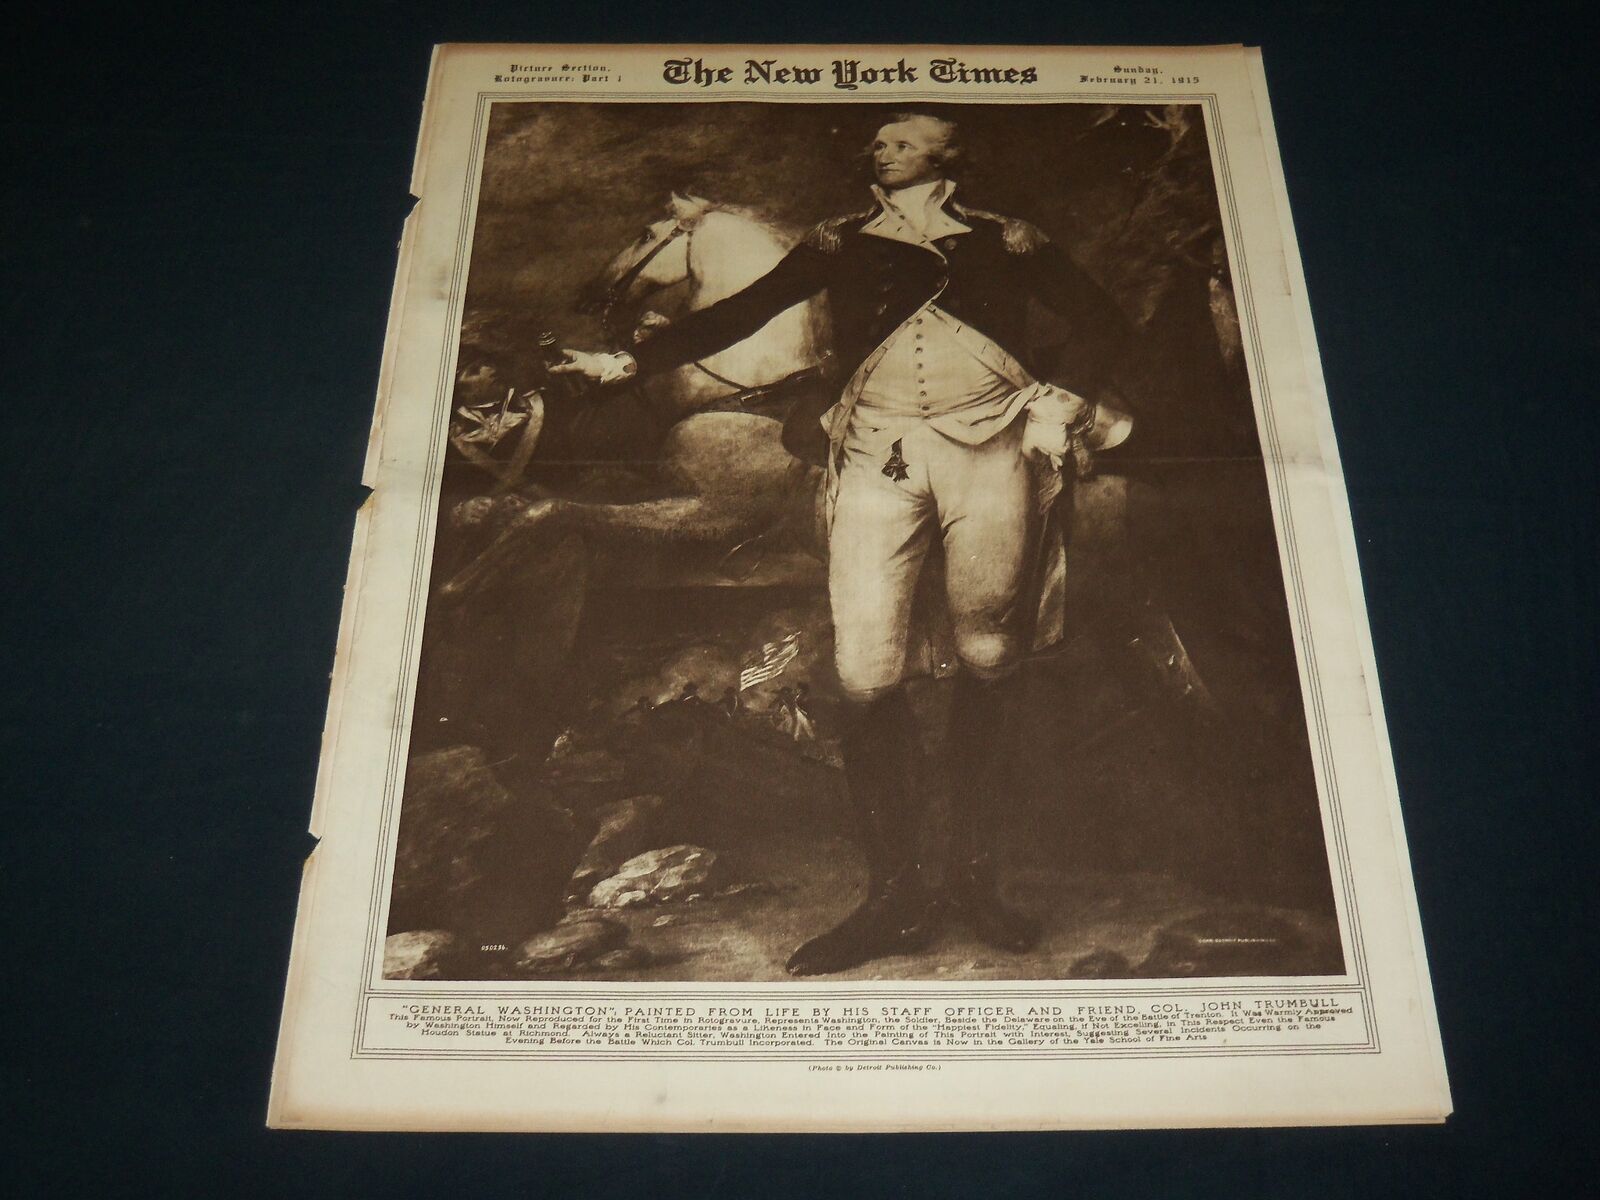 1915 FEBRUARY 21 NEW YORK TIMES PICTURE SECTION - WASHINGTON PORTRAIT - NT 8950